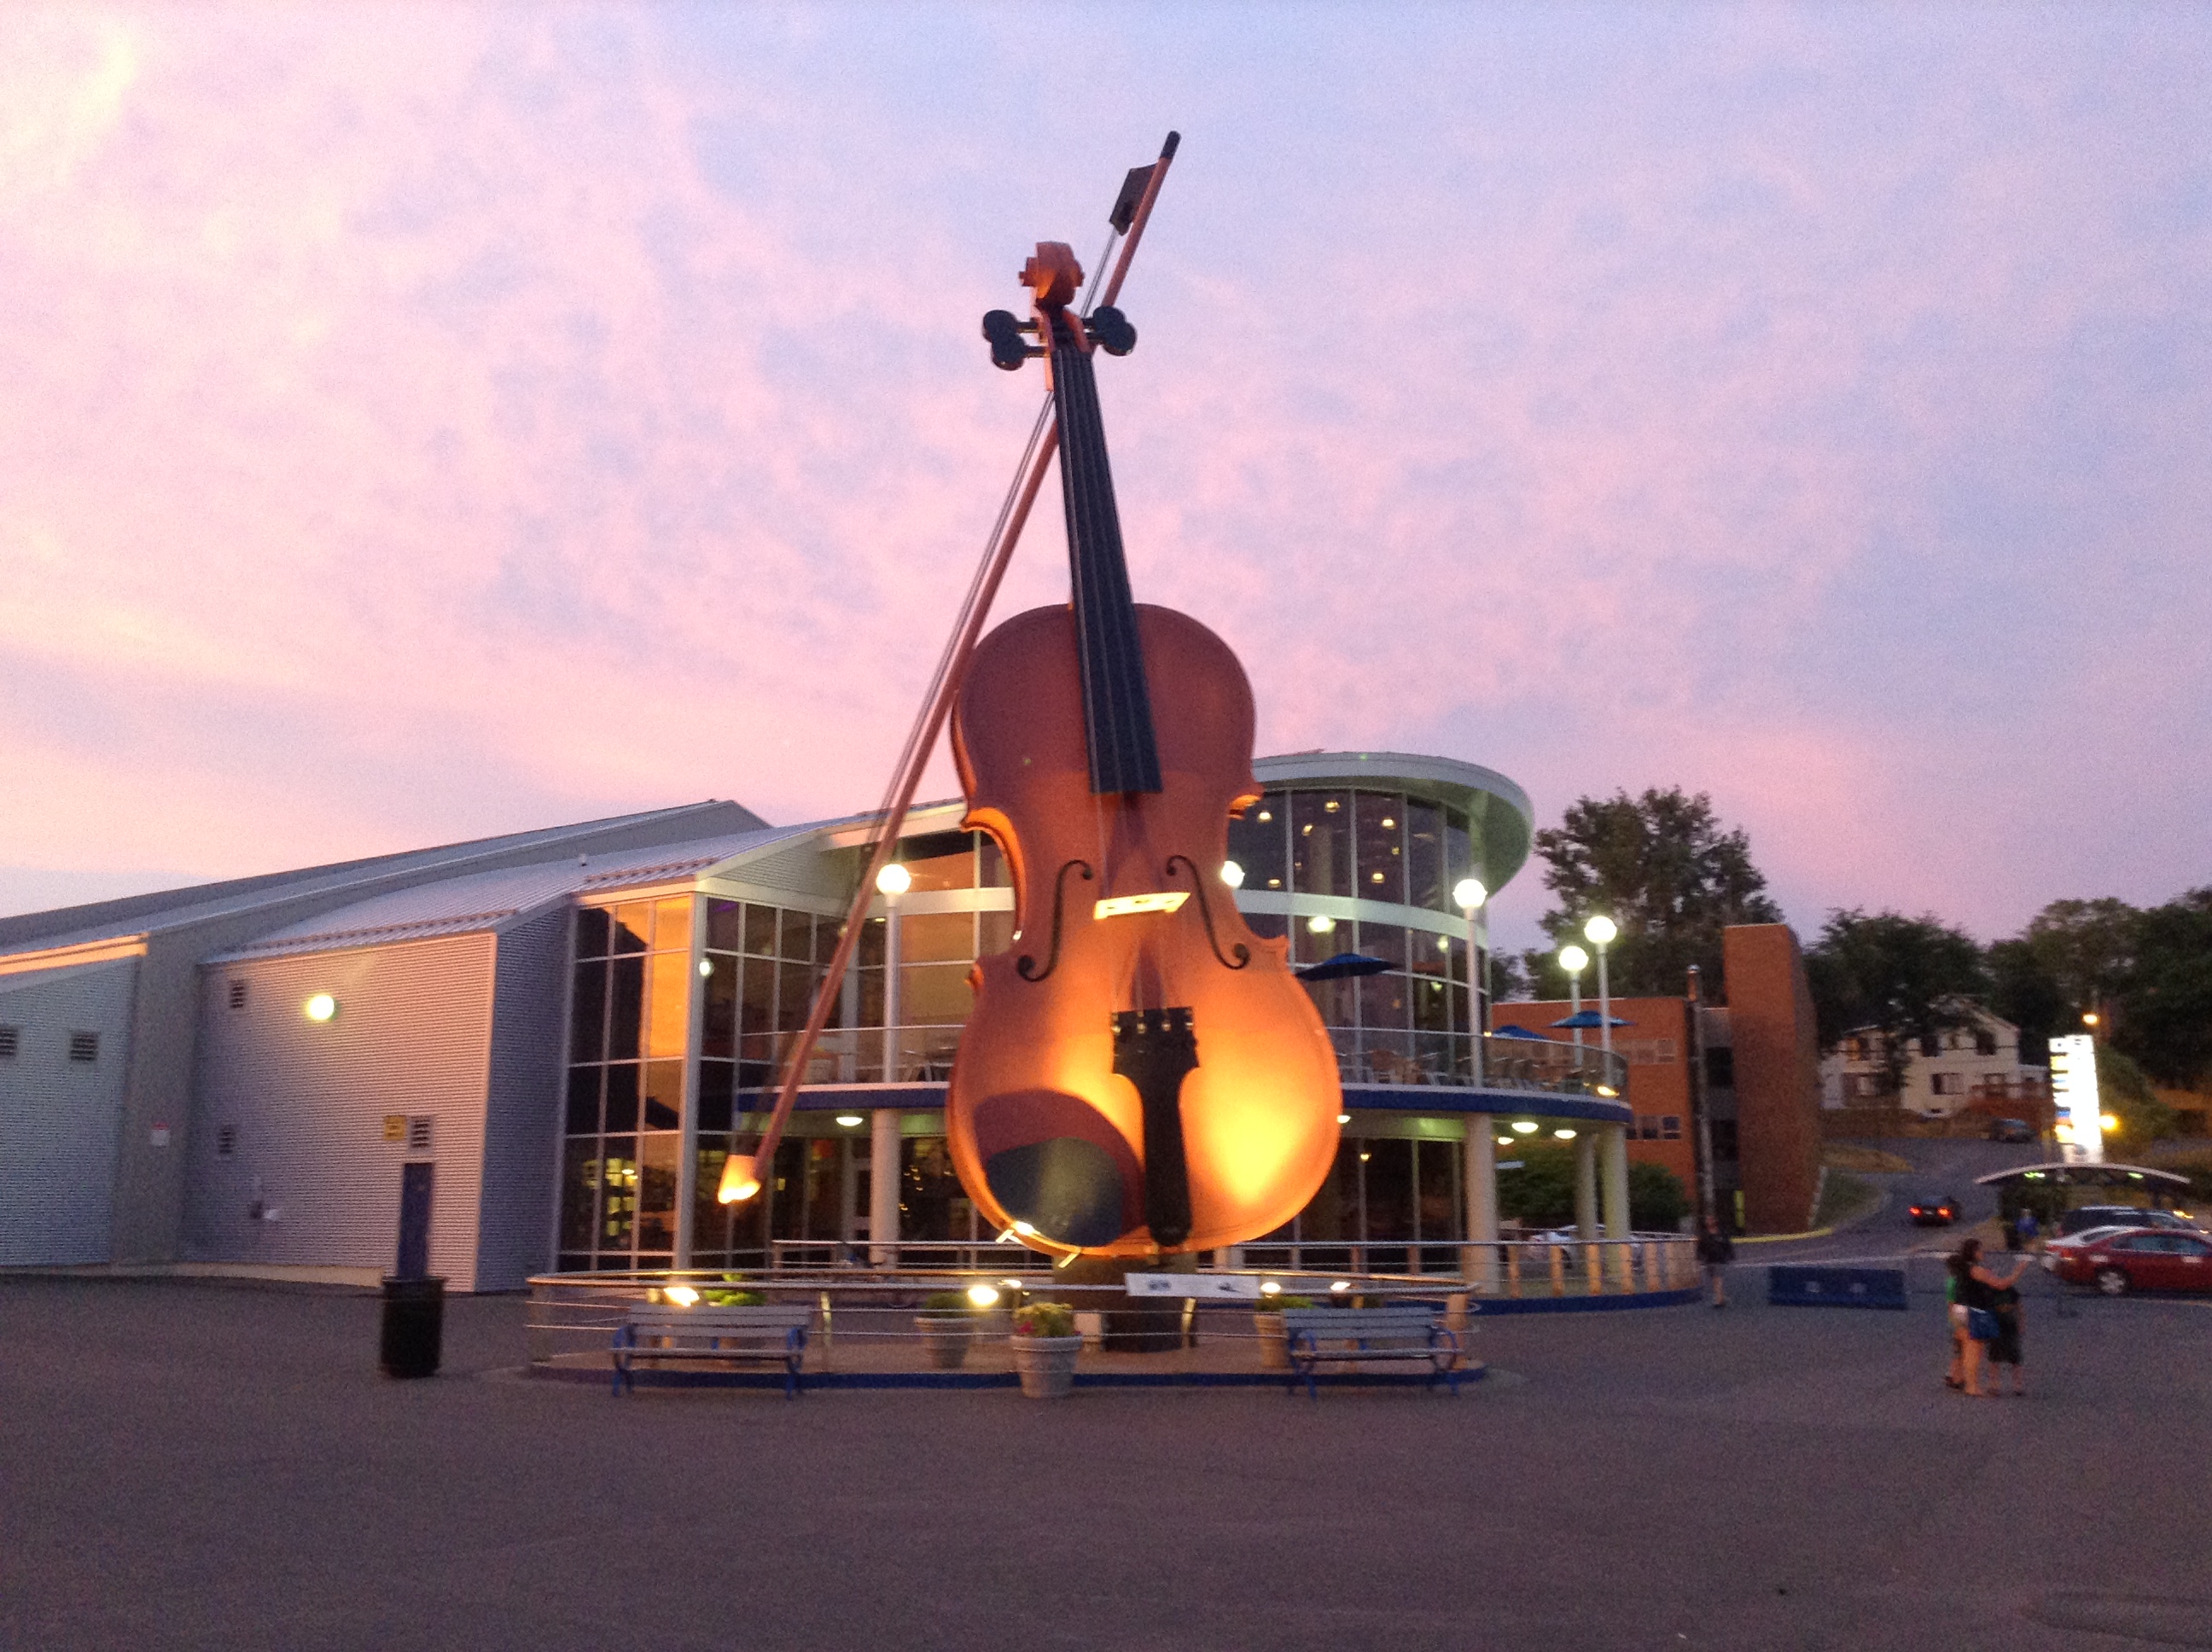 Here is the Big Fiddle at the Sydney Marine Terminal and it looks So Beautiful during the Mid Summer and it is also Warm and Humid on Tuesday Evening.